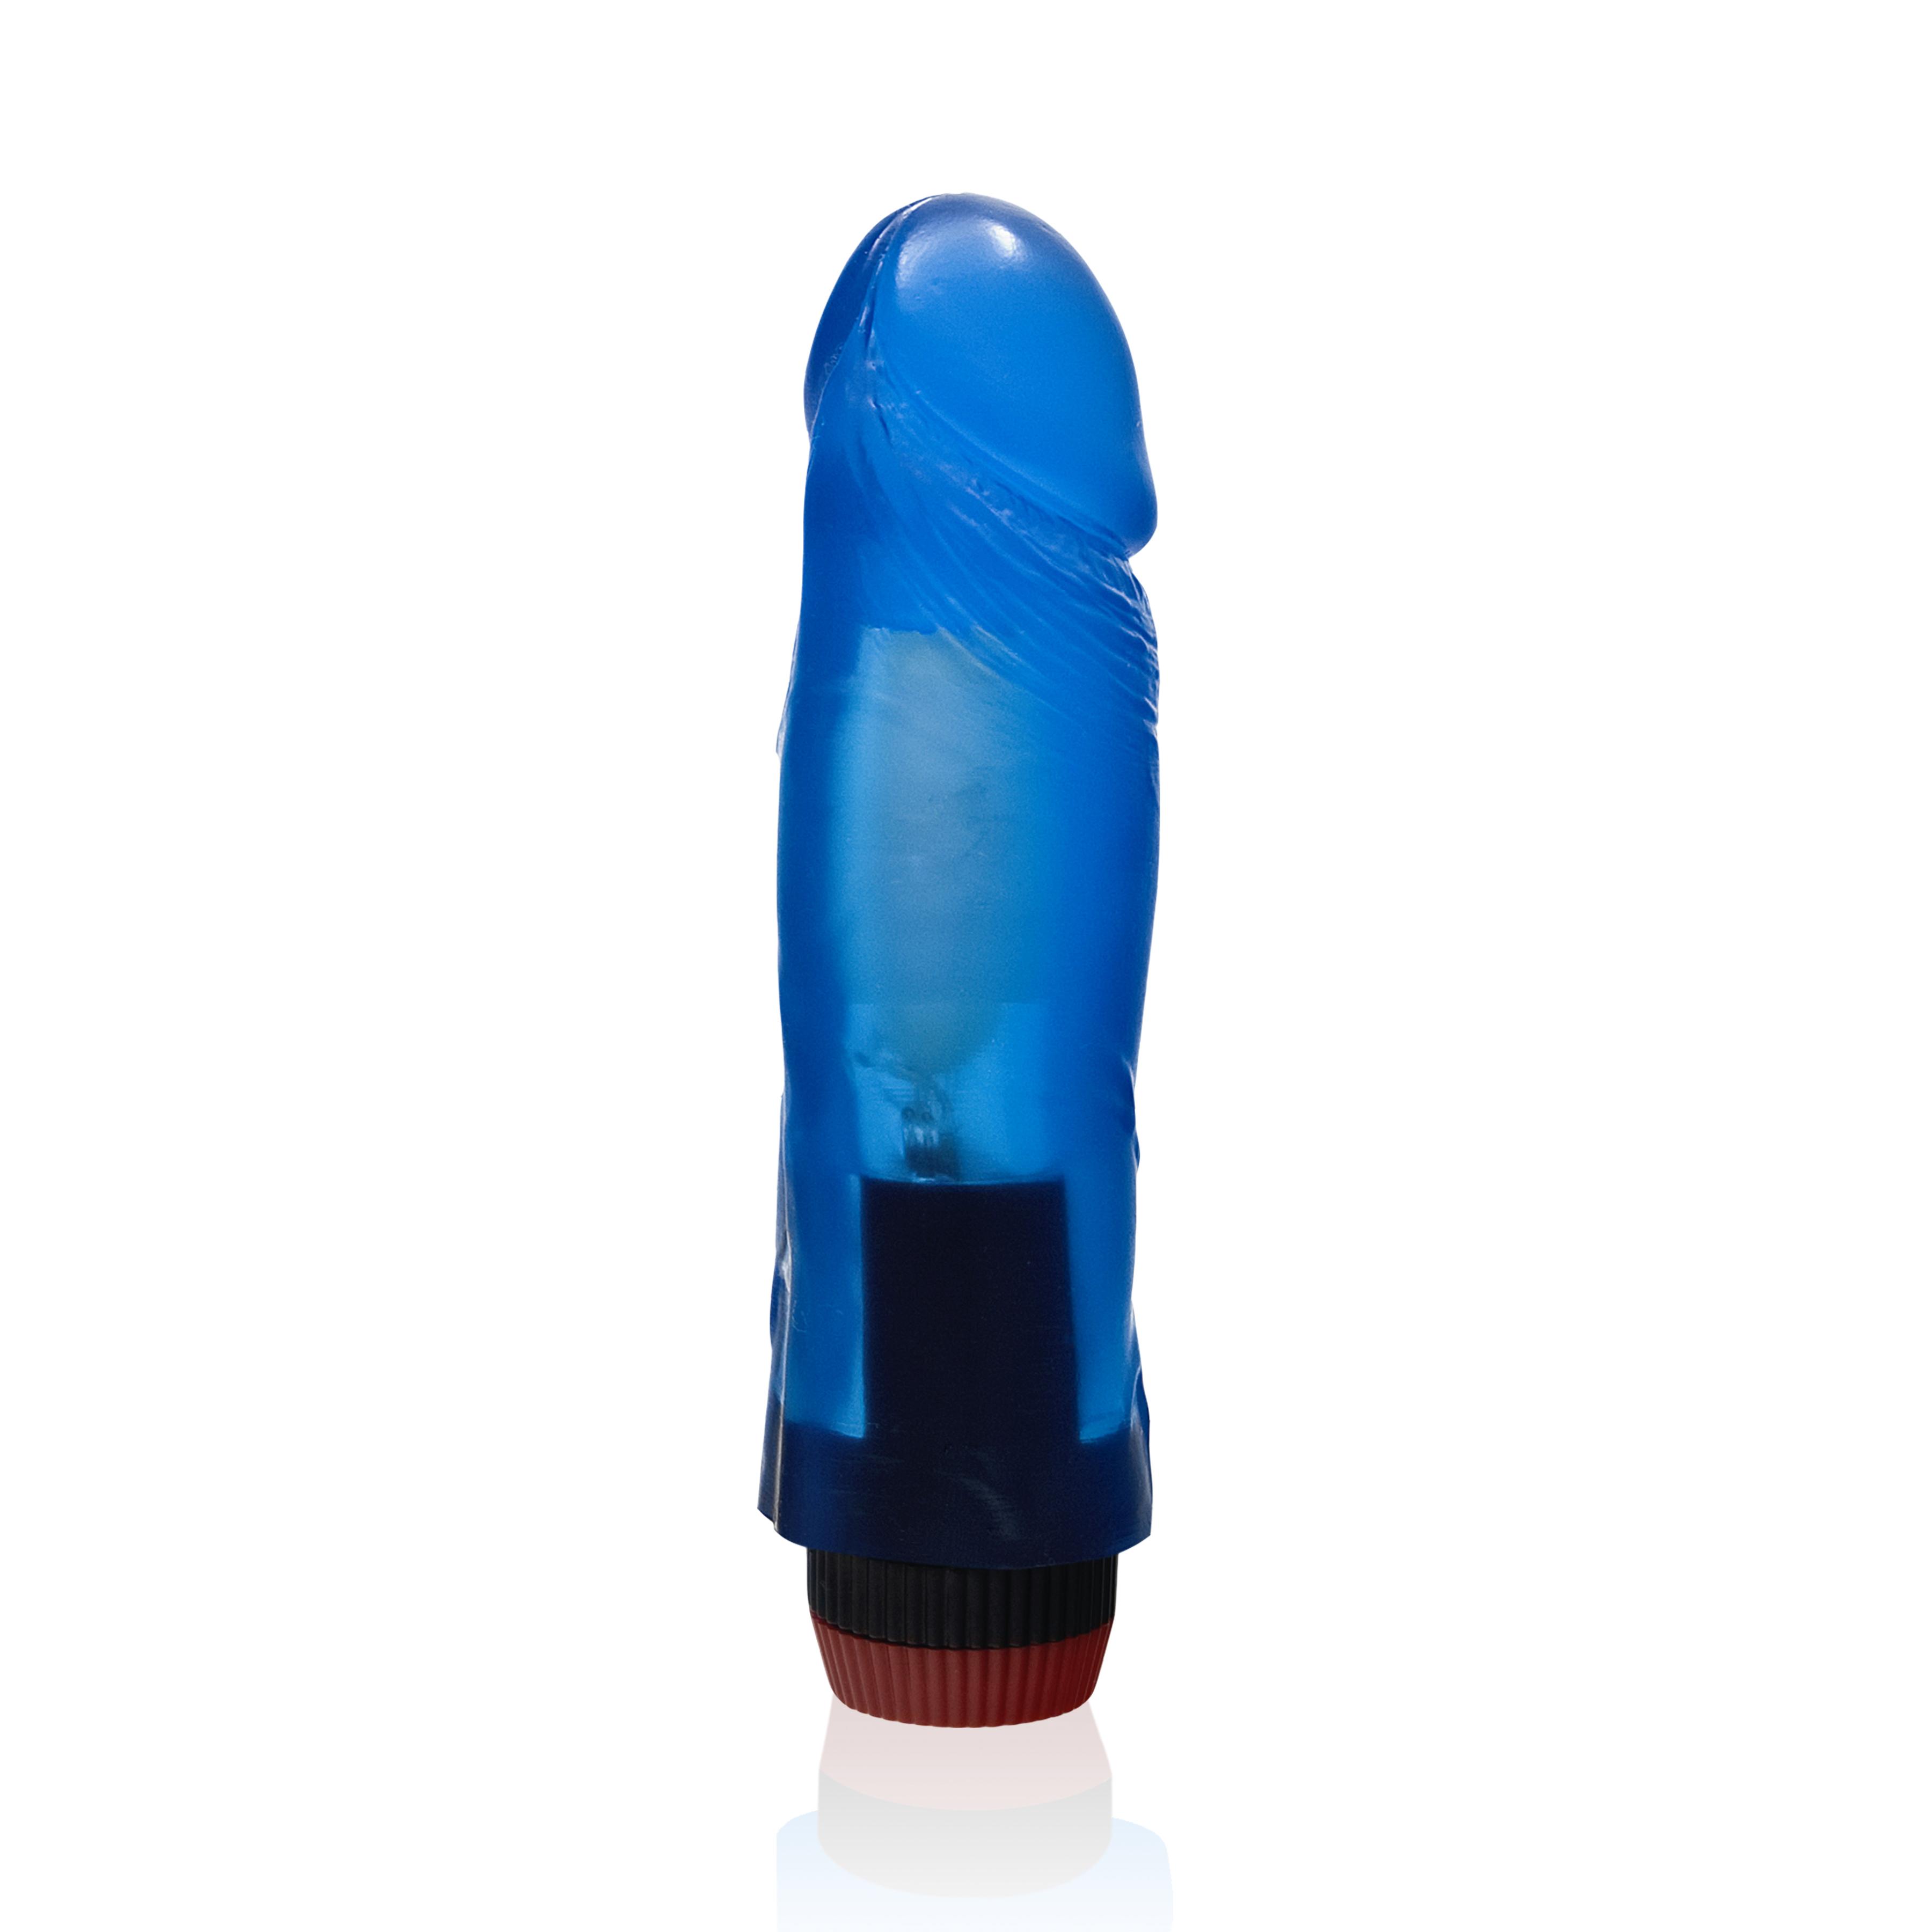 SI IGNITE Cock Dong with Vibration, Blue, 18 cm